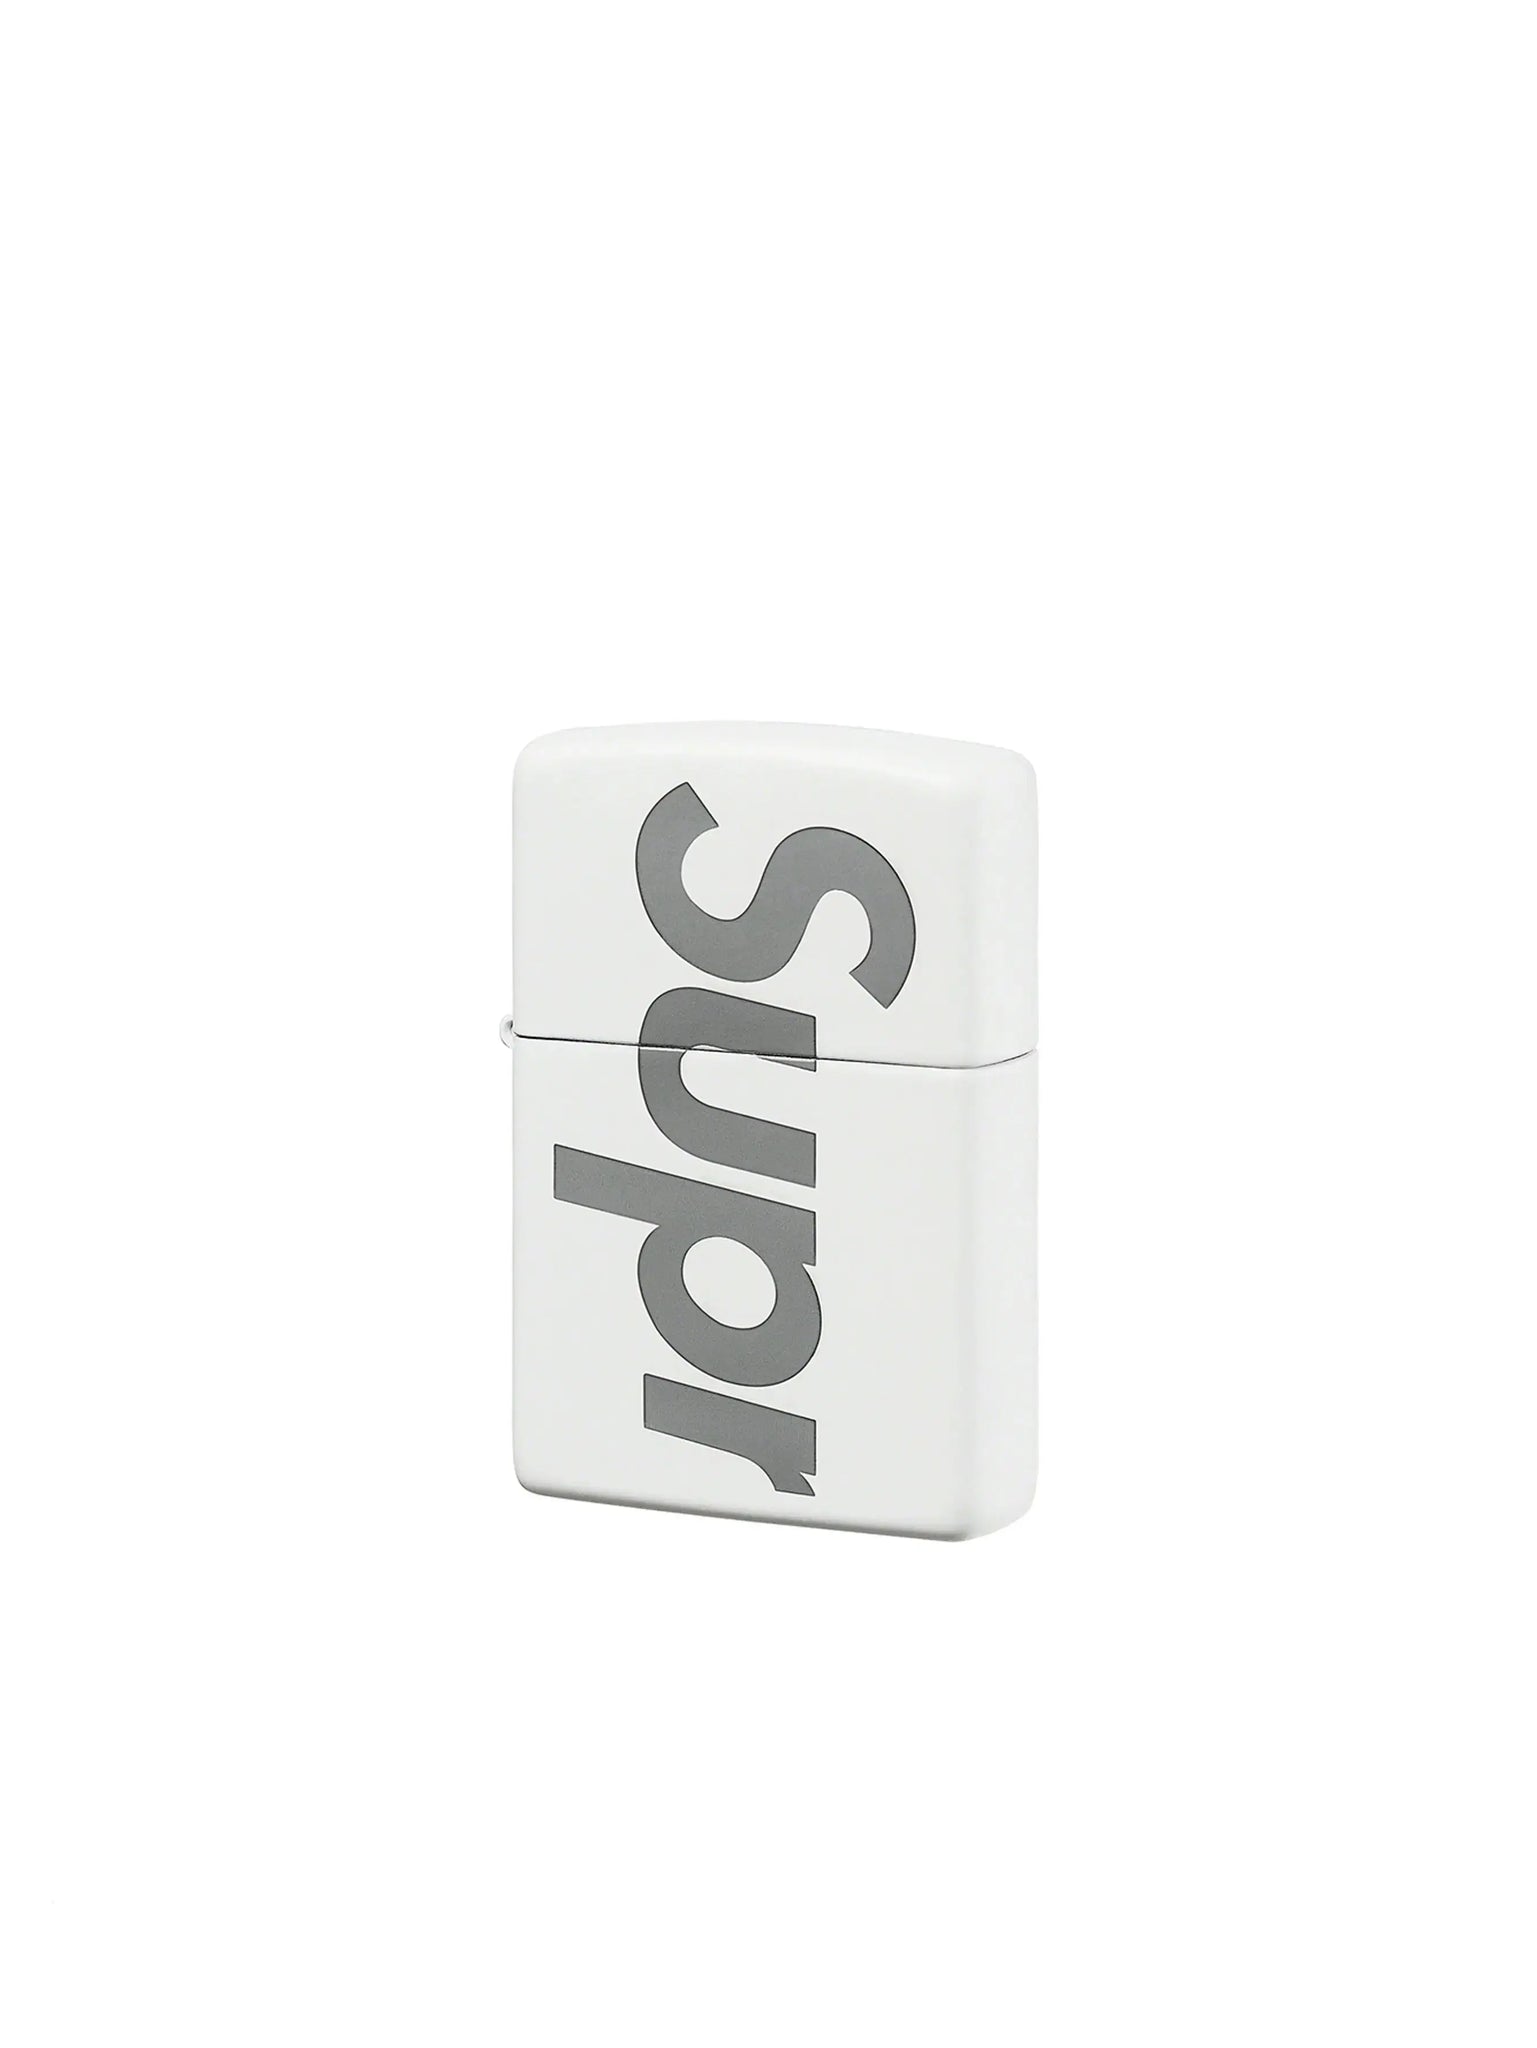 Supreme Glow In The Dark Zippo White in Auckland, New Zealand - Shop name